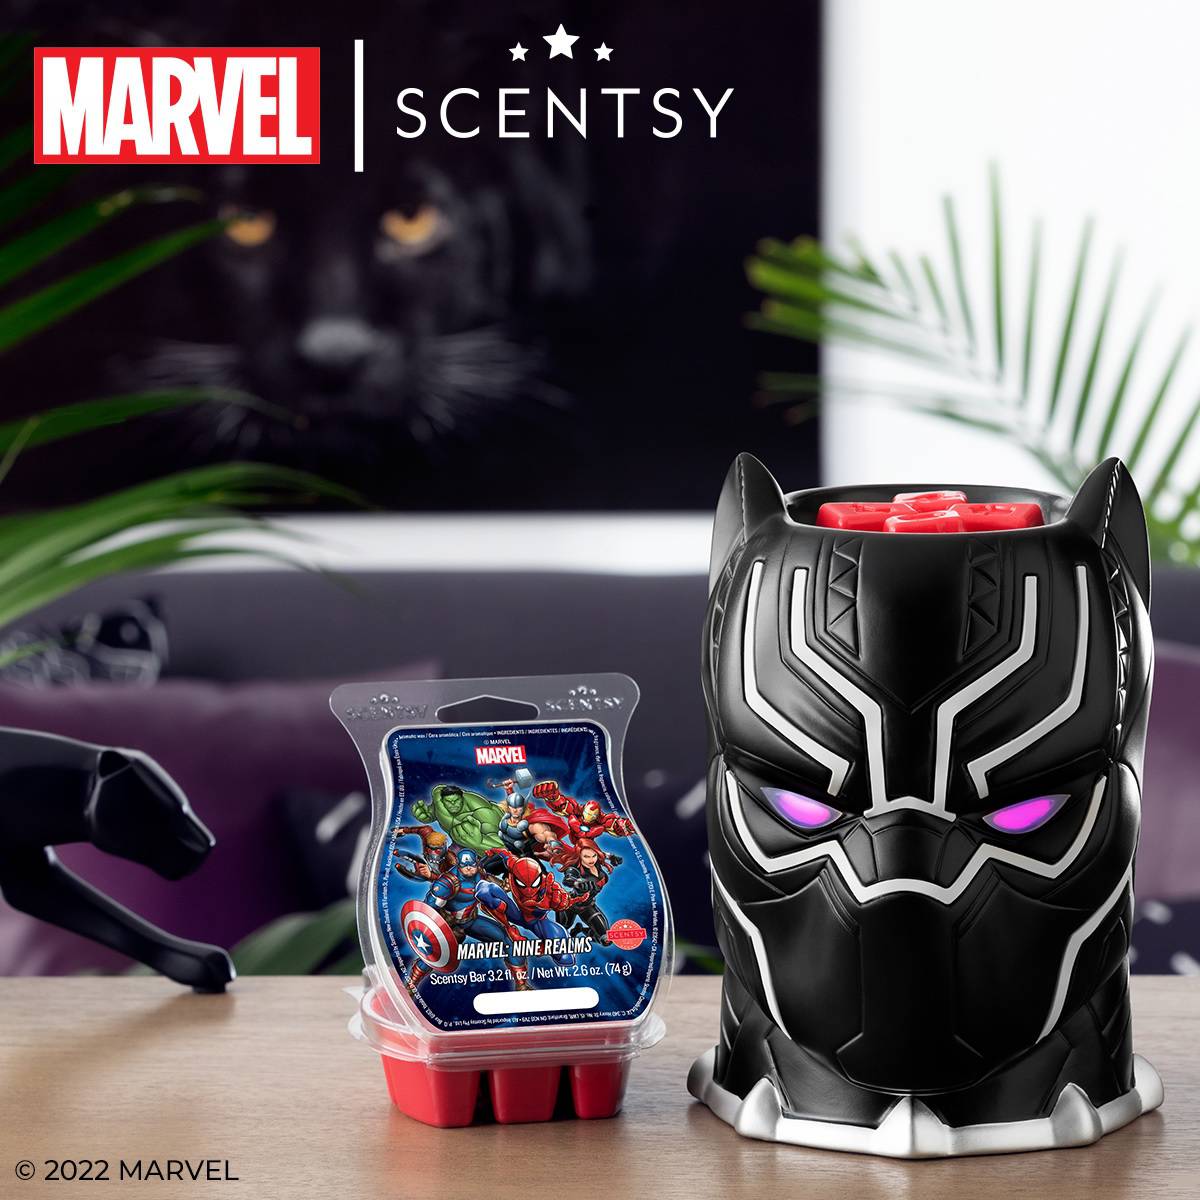 Black Panther Scentsy Warmer